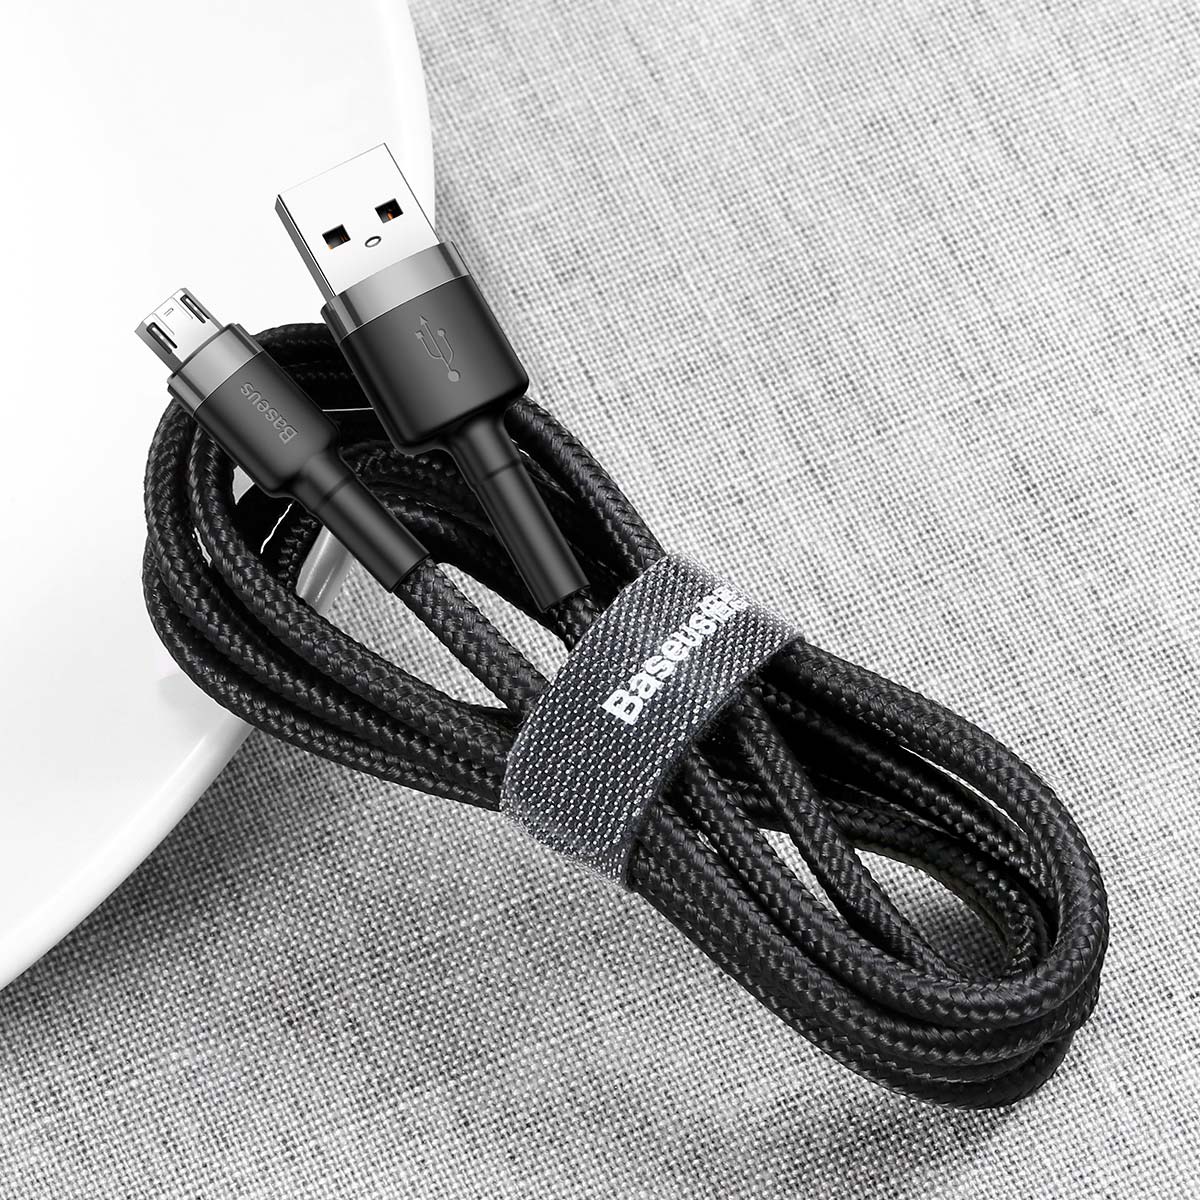 Fast Charging Smartphone Cable - Micro USB - 2.4A - SpicyJam™ Ireland